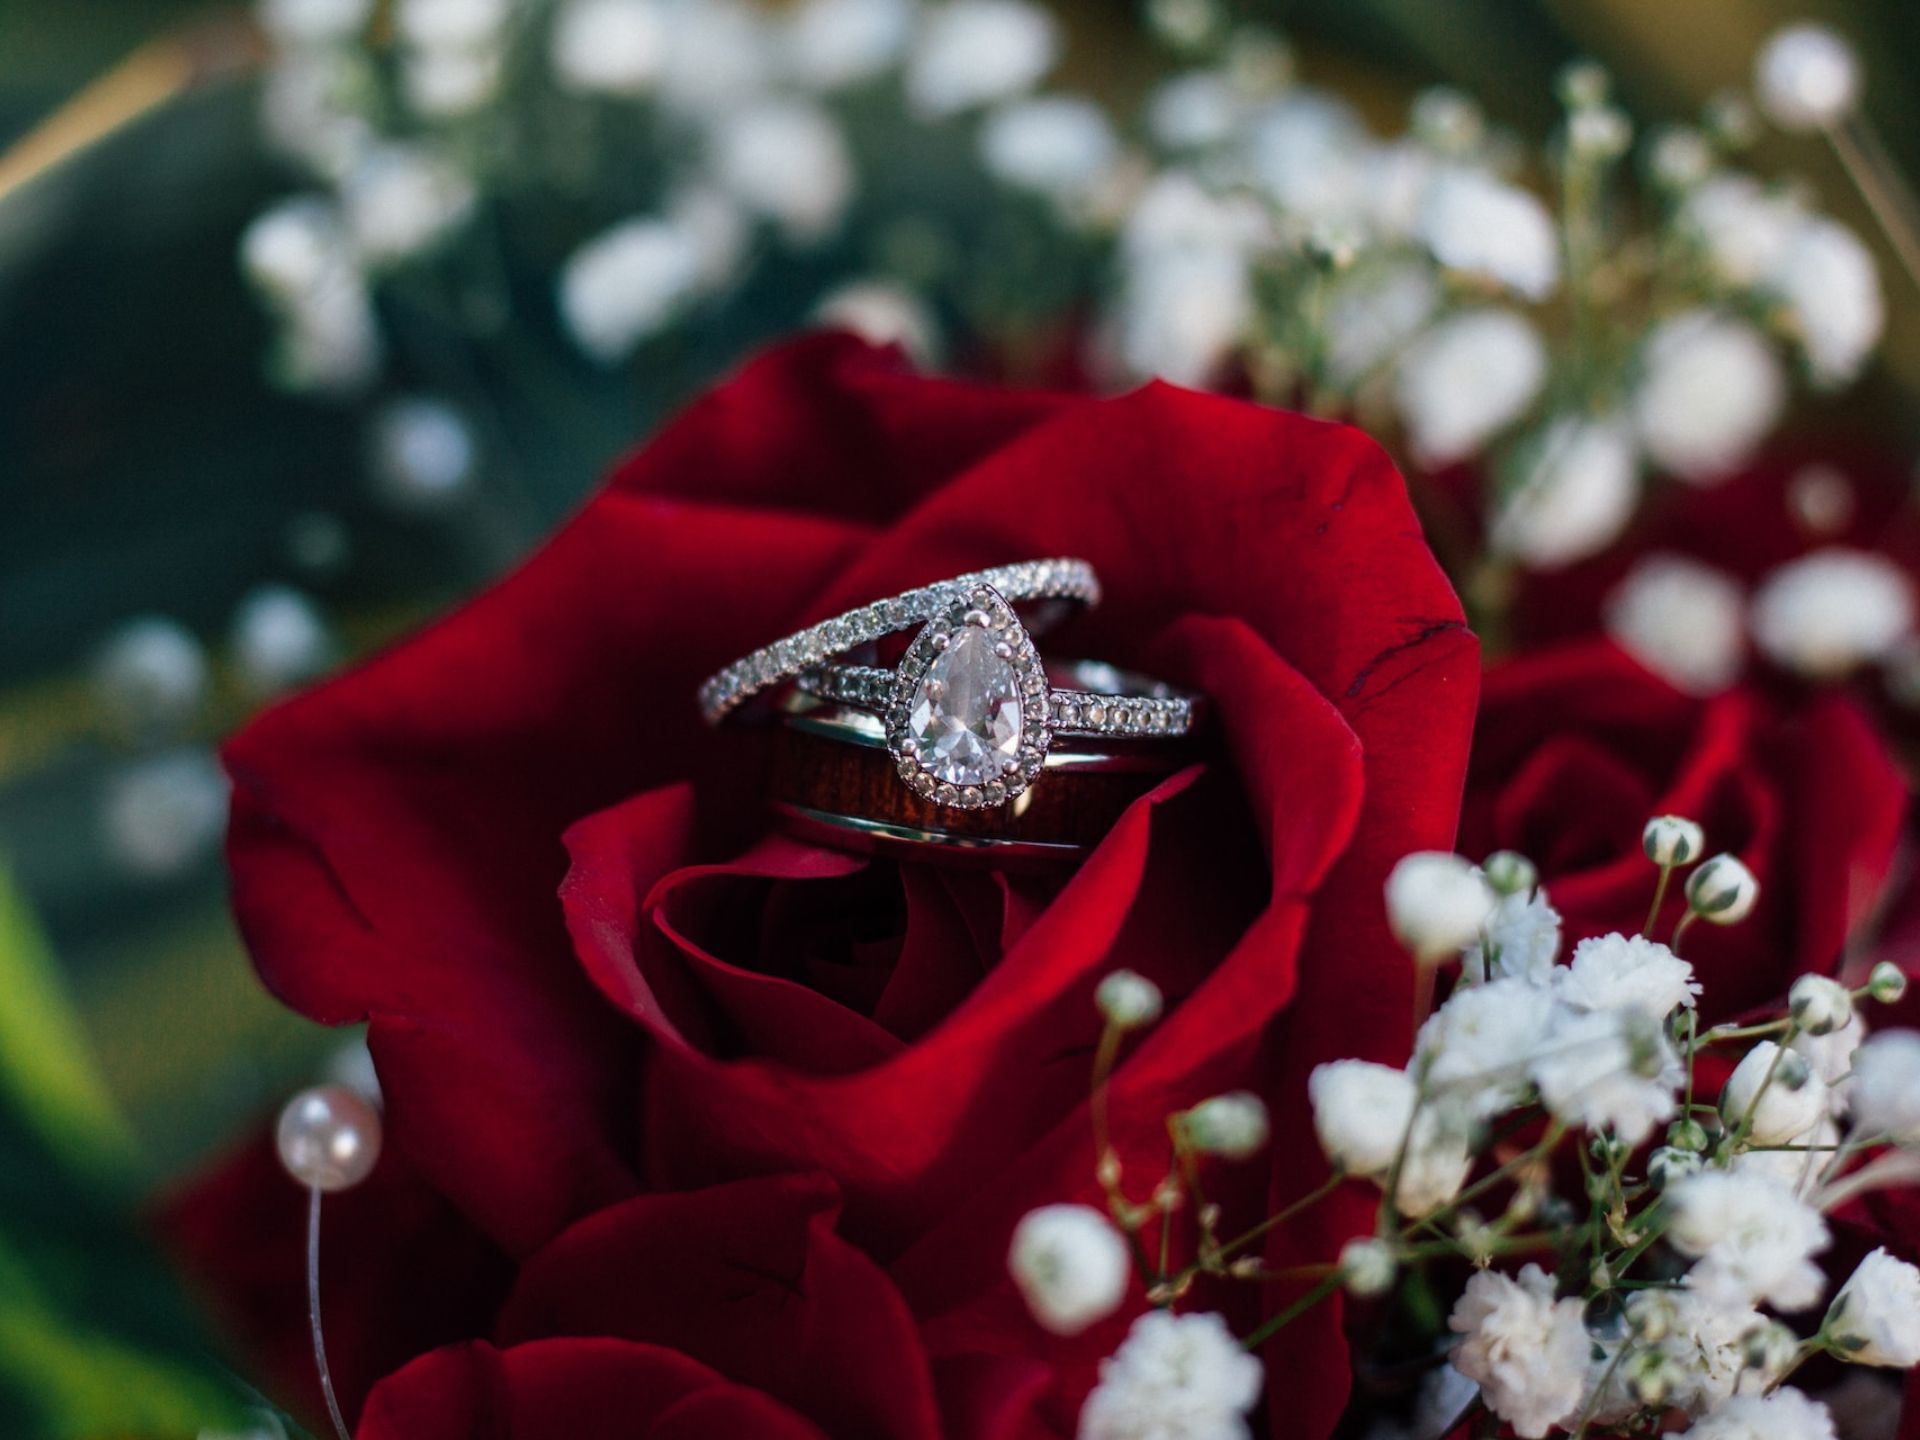 A red rose with an engagement ring on top.